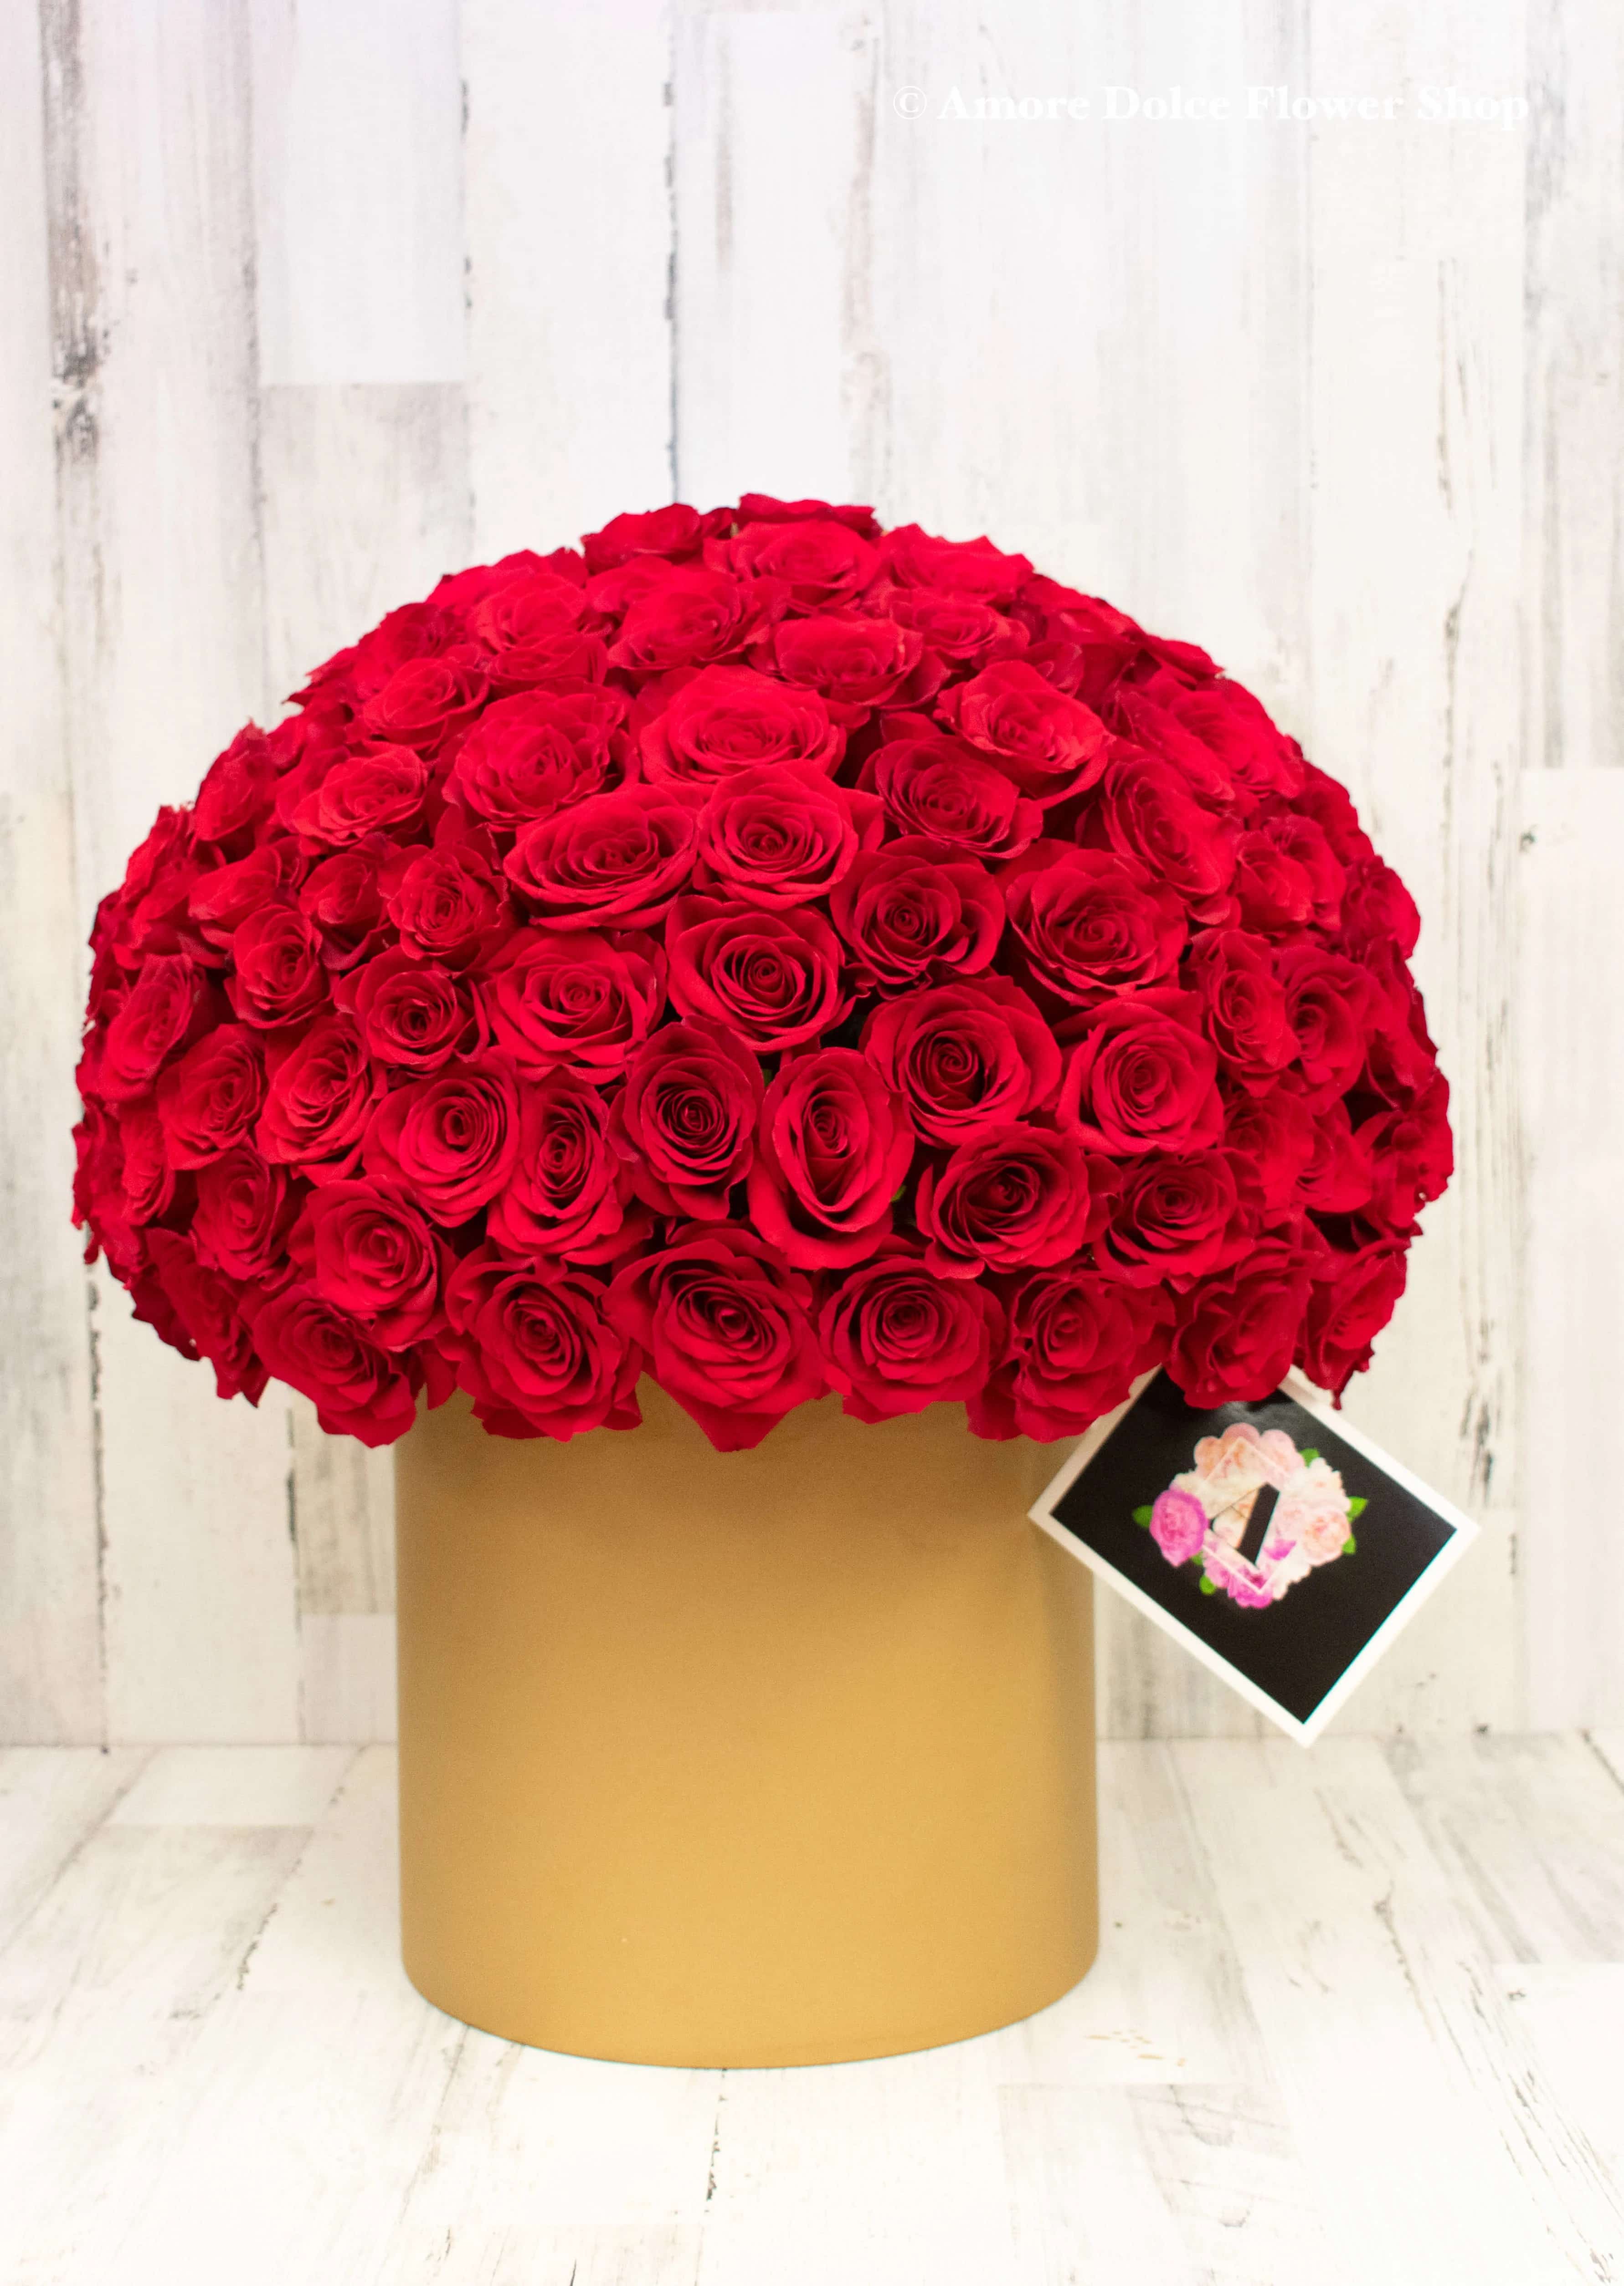 Amore Dolce Flowers and Chocolates - Montebello, CA, US, bridal bouquet cost